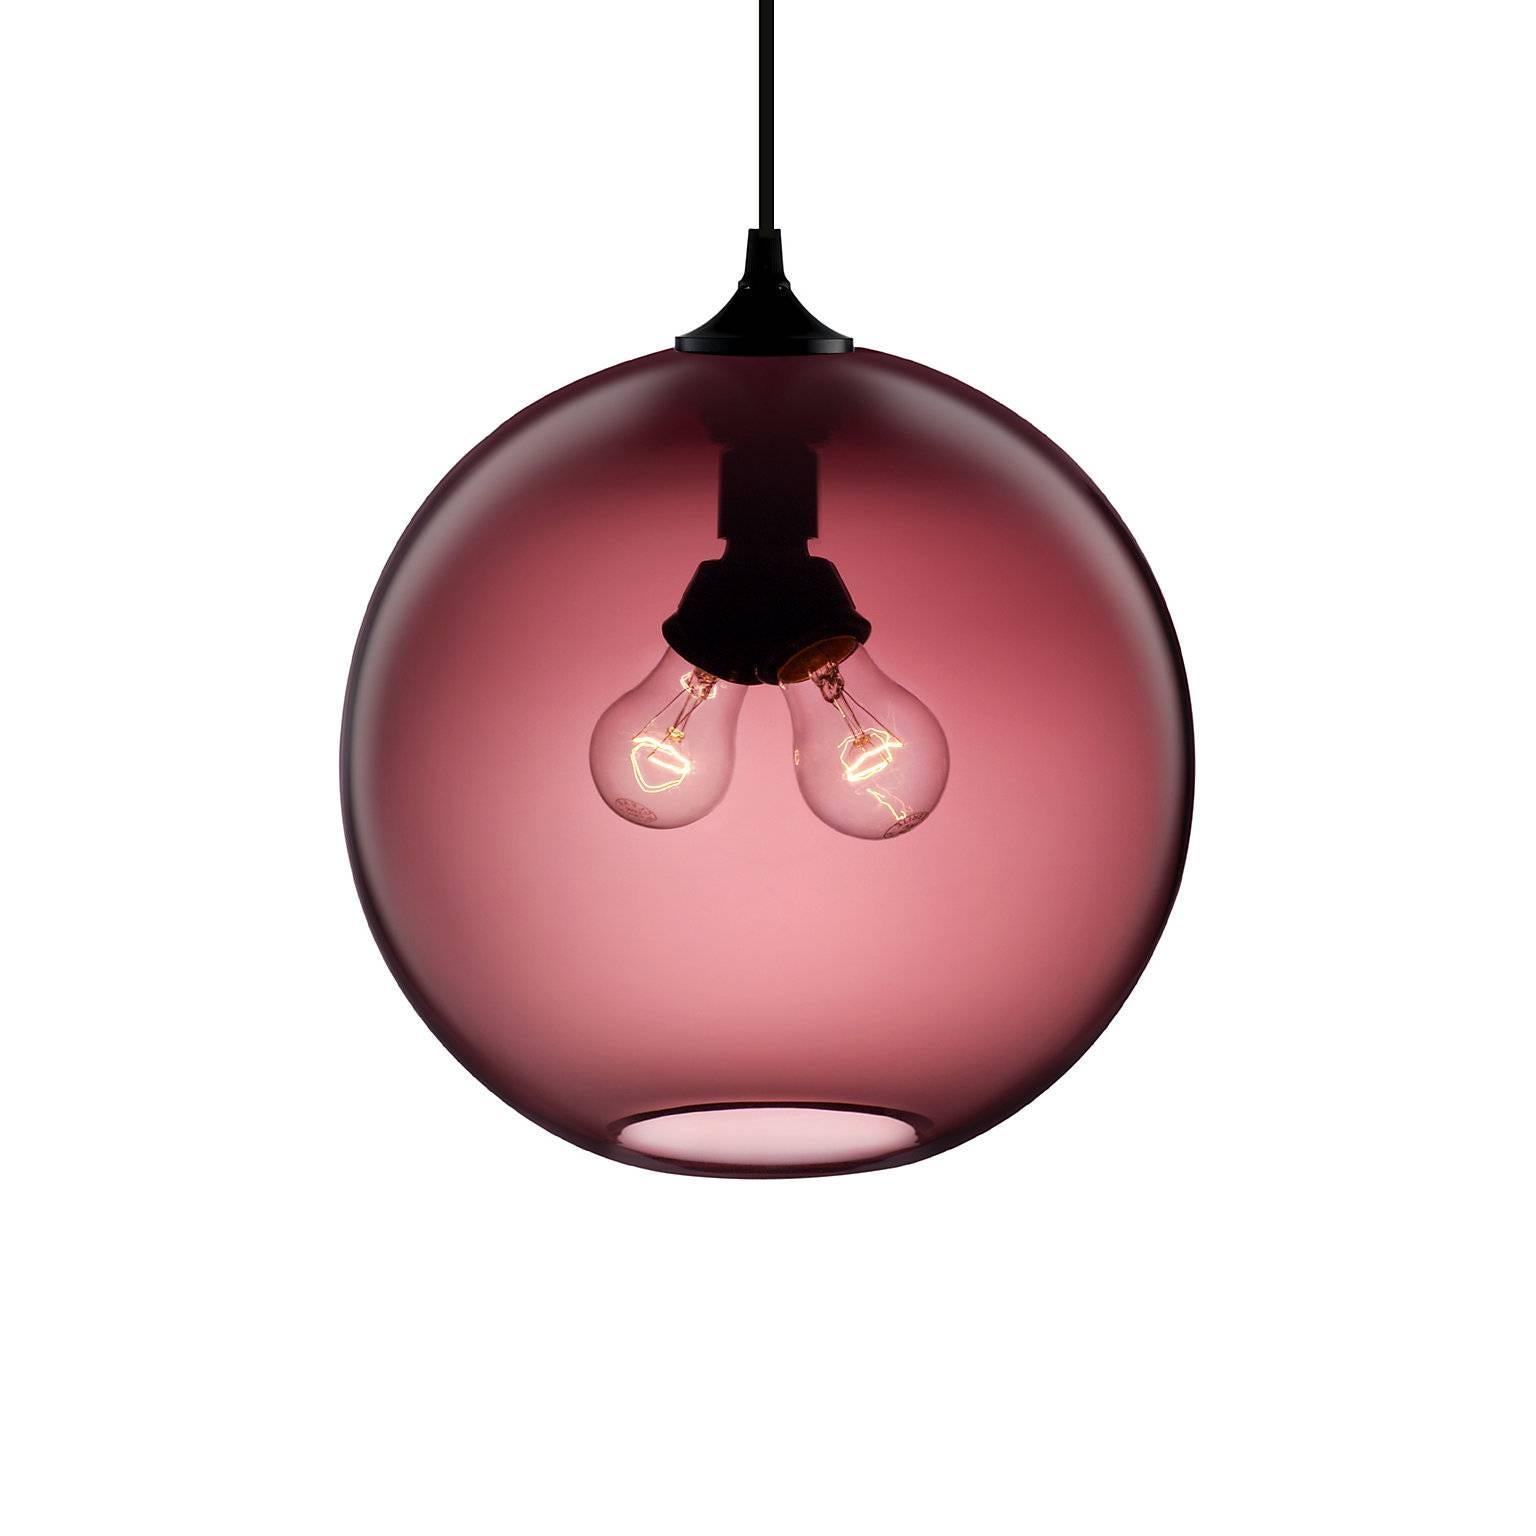 The allure of the Binary pendant is the presence of two bulbs at the pendant’s center, radiating rich, ambient light. Every single glass pendant light that comes from Niche is handblown by real human beings in a state-of-the-art studio located in